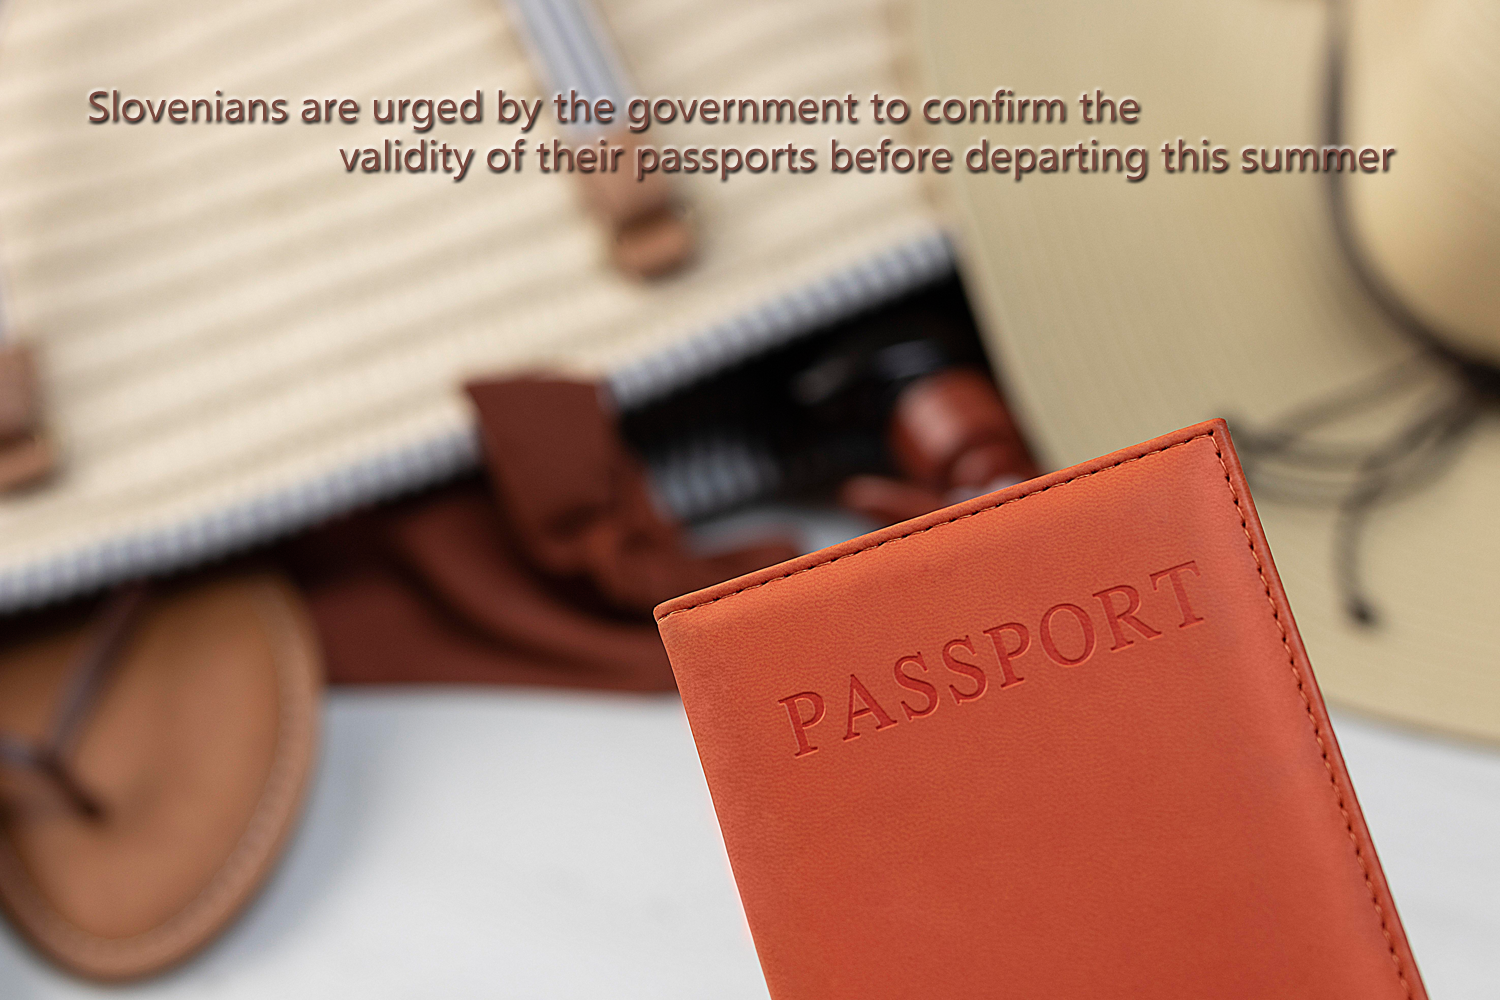 Slovenians are urged by the government to confirm the validity of their passports before departing this summer.